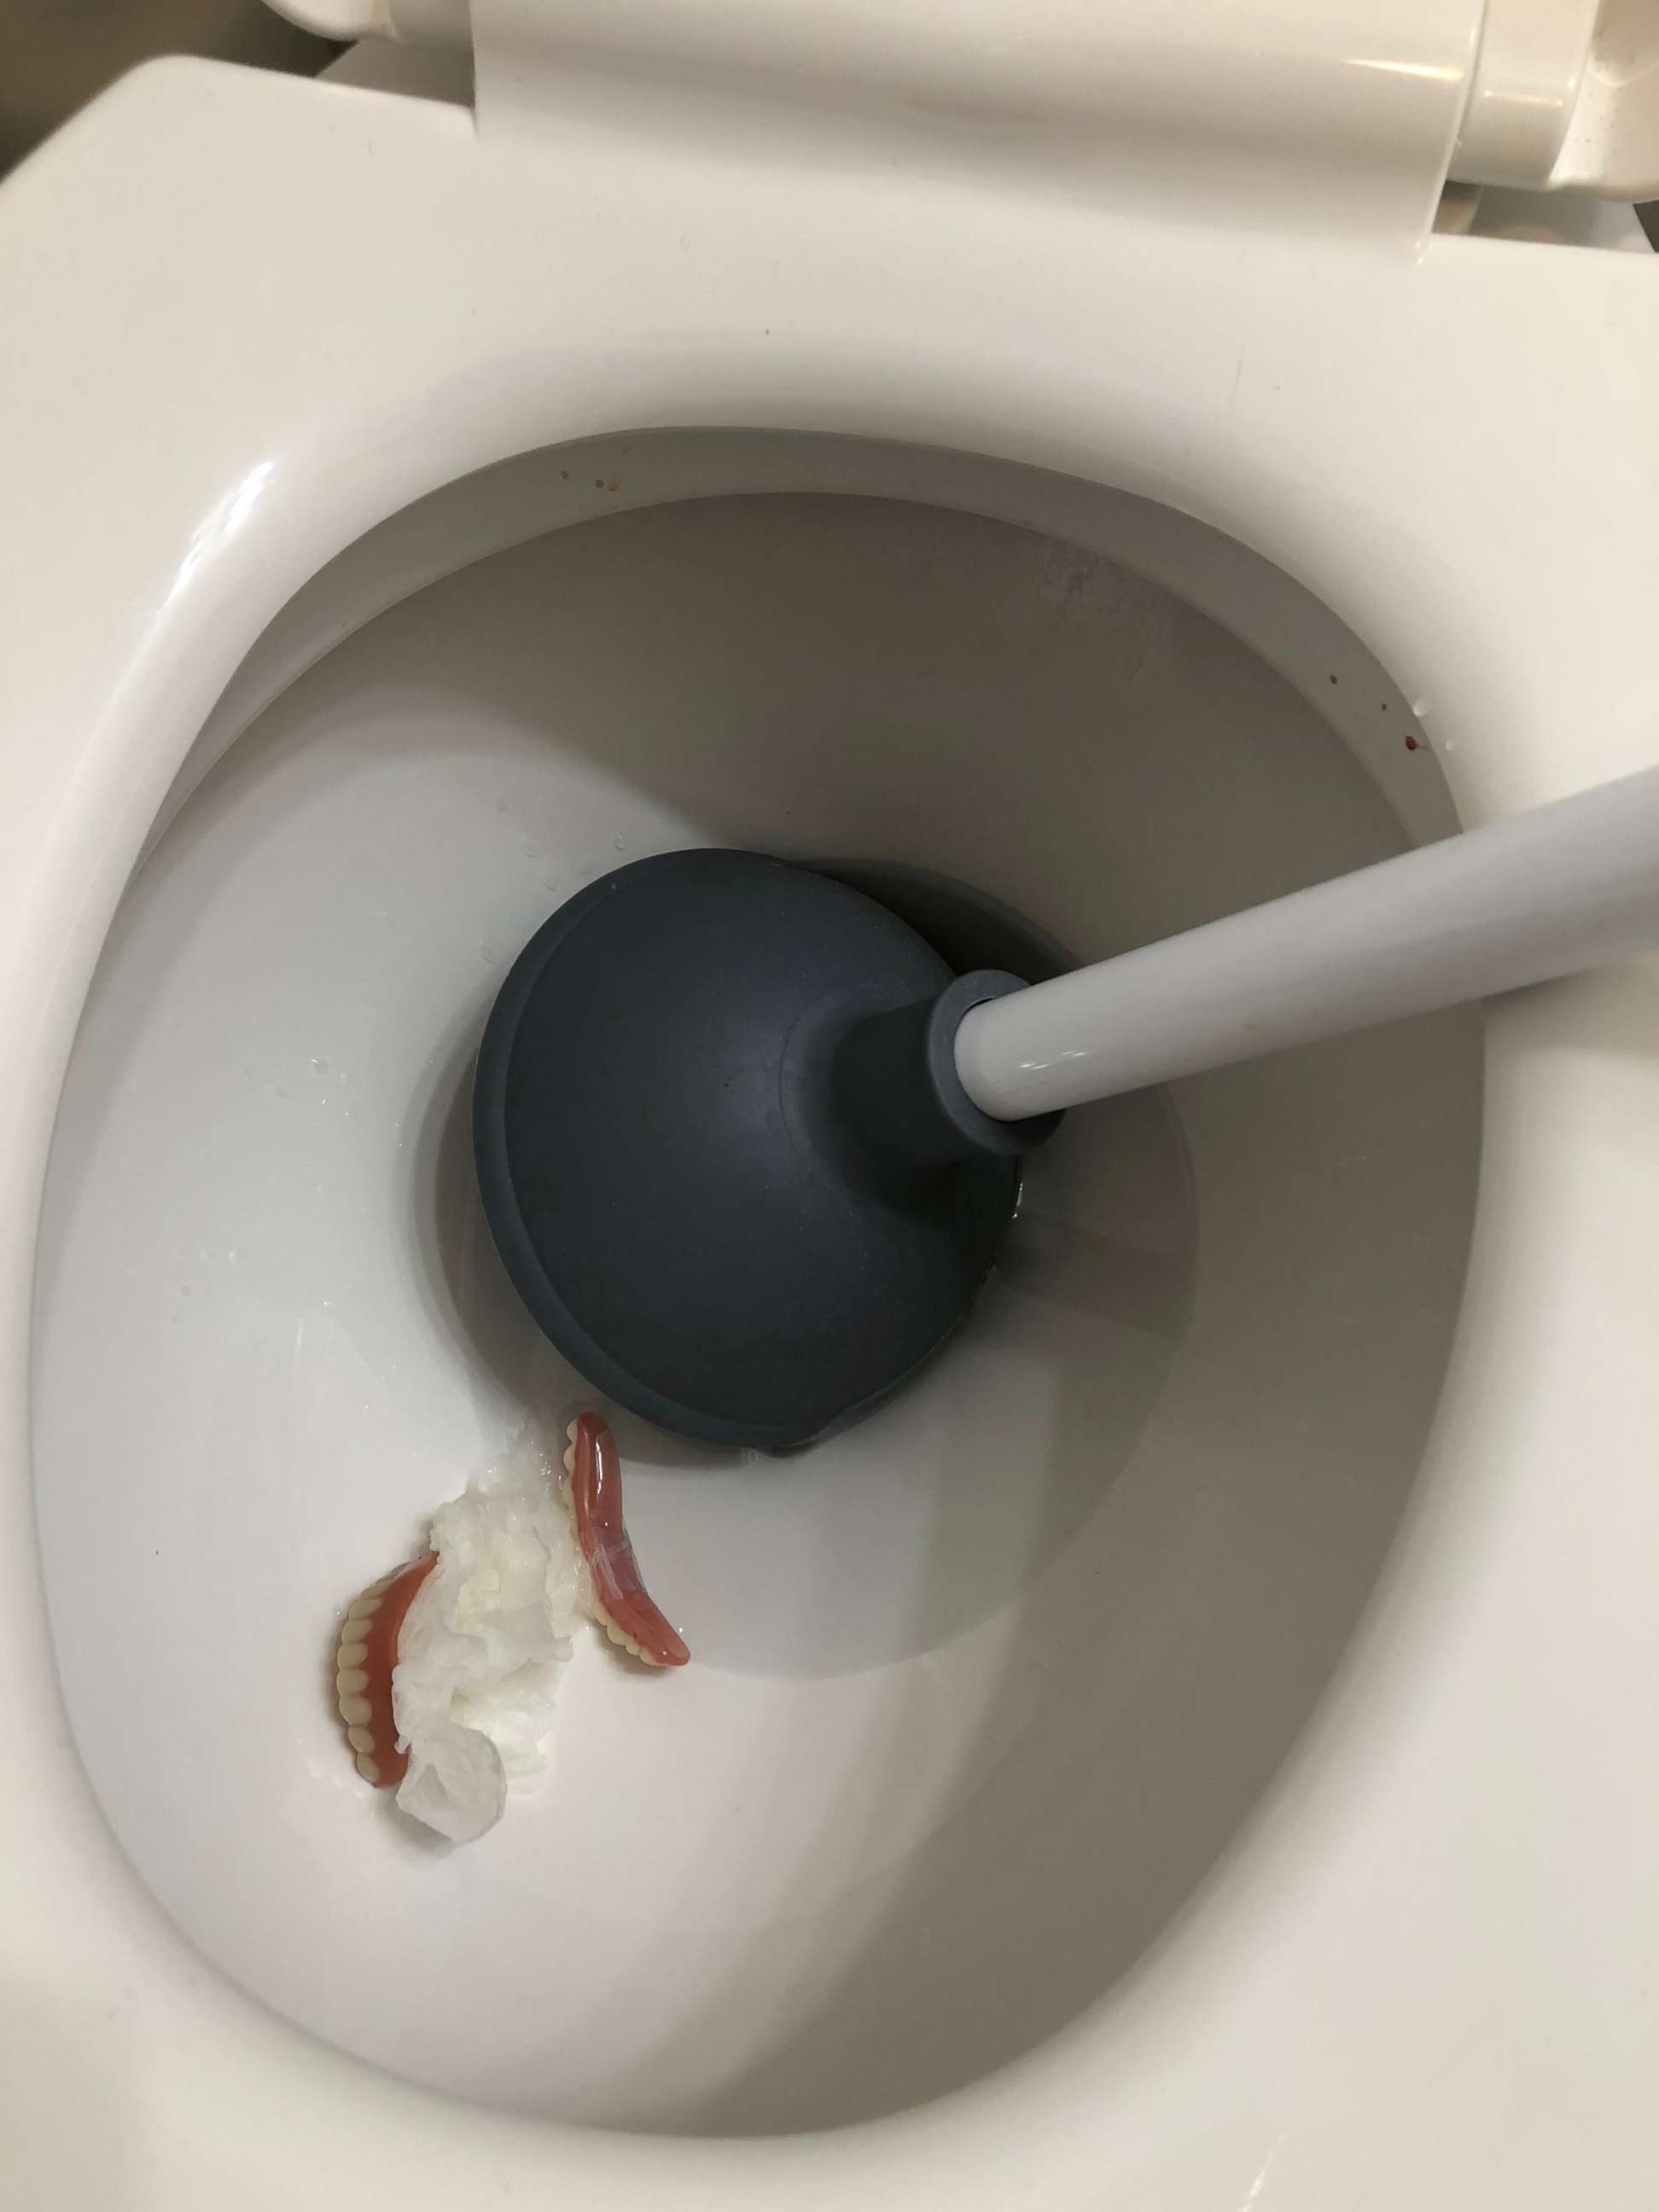 PHOTO: A California plumber was surprised when these dentures showed up in a clogged toilet.